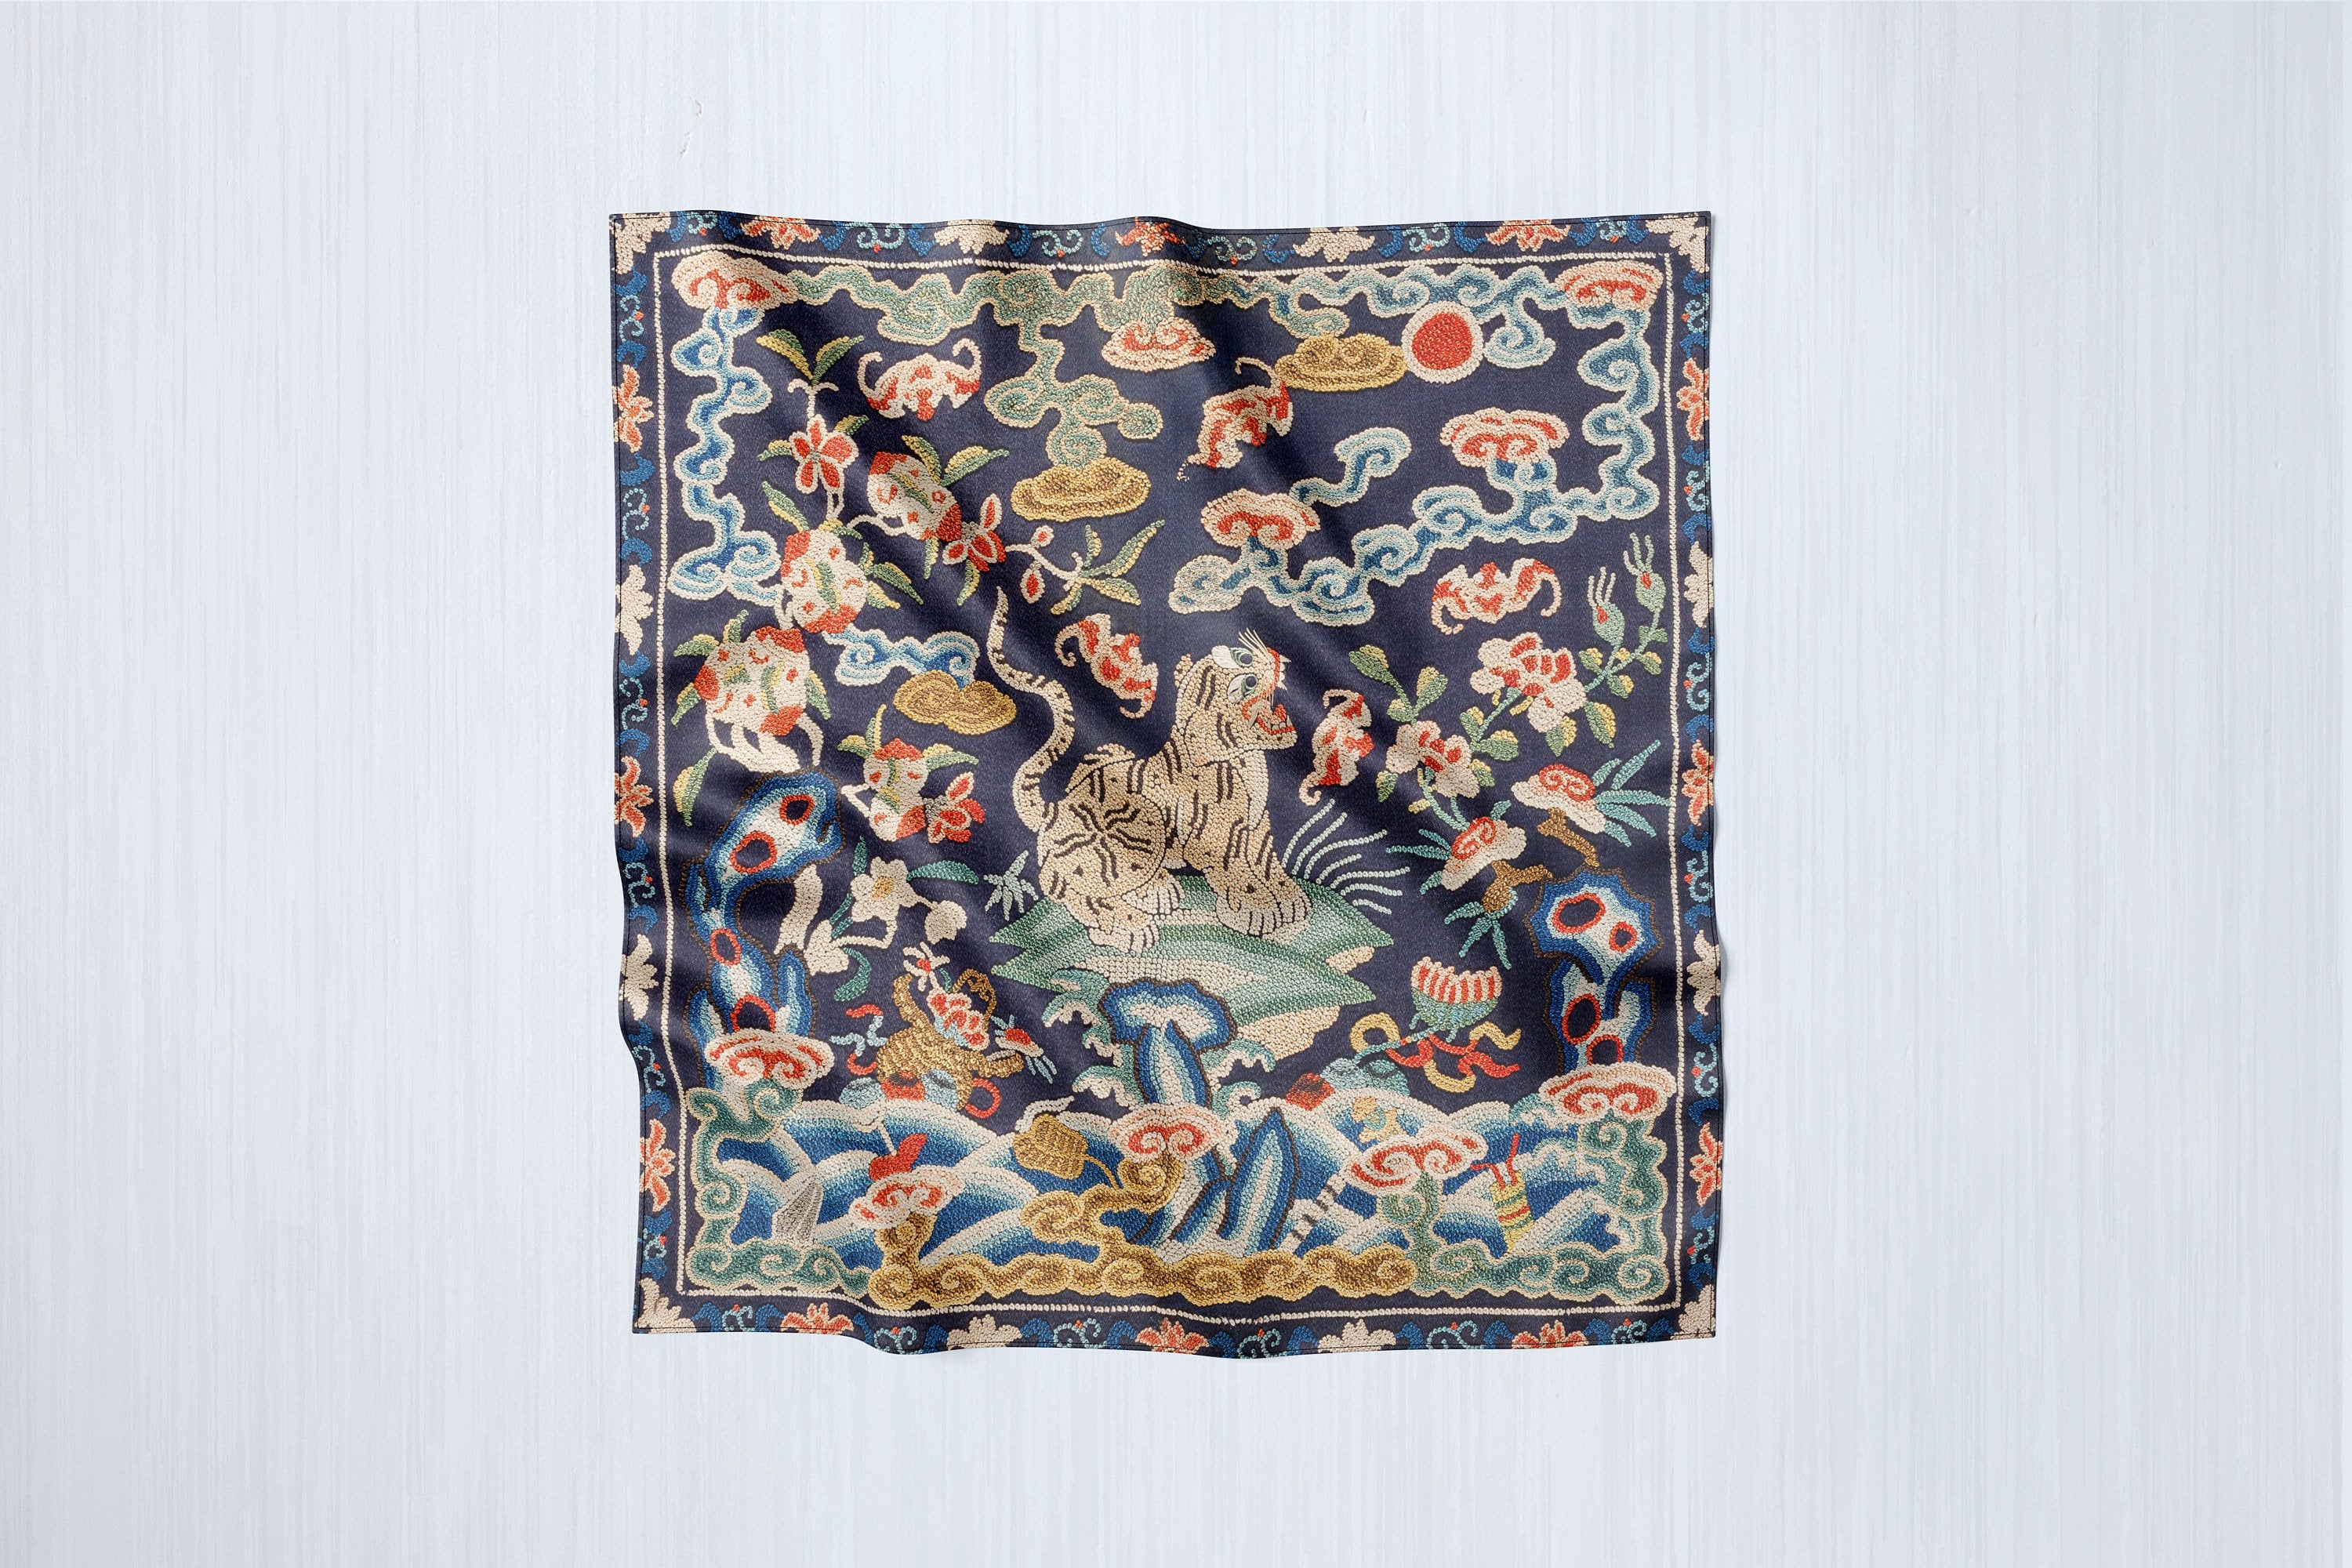 Qing Dynasty Tiger Tapestry, Luxurious Square Scarf/Wrap/Boho Shawl, Made to Order, Handmade and Cruelty Free